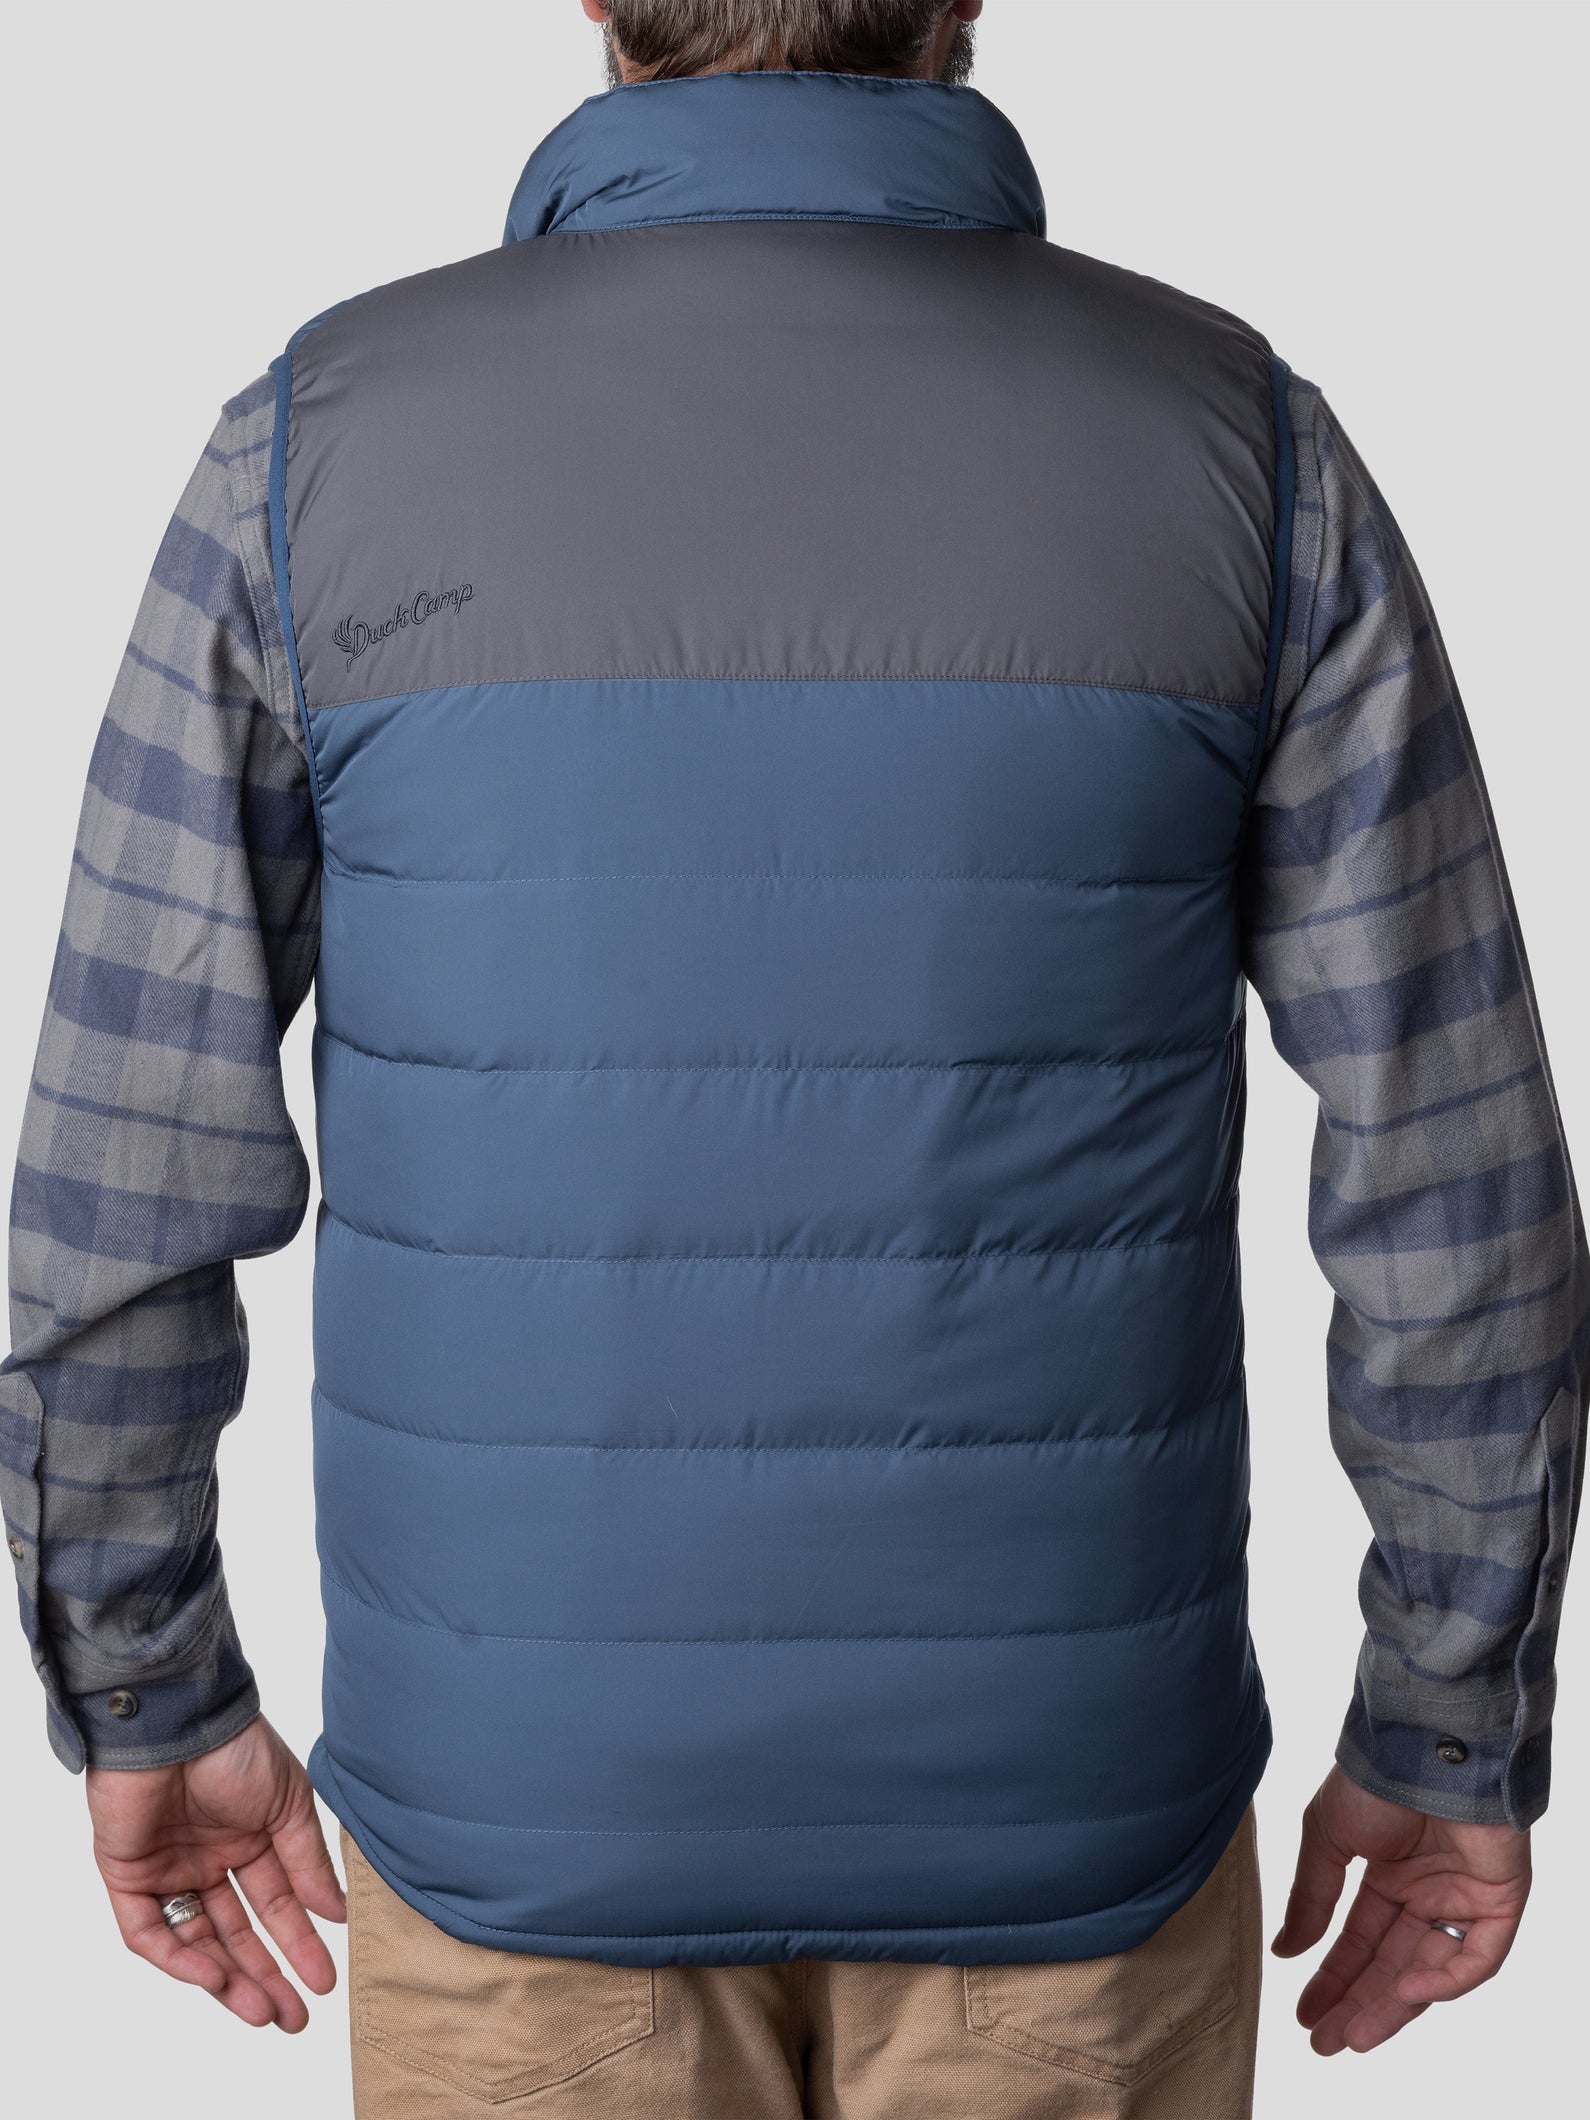 DryDown Reversible Vest - Faded Navy/Charcoal